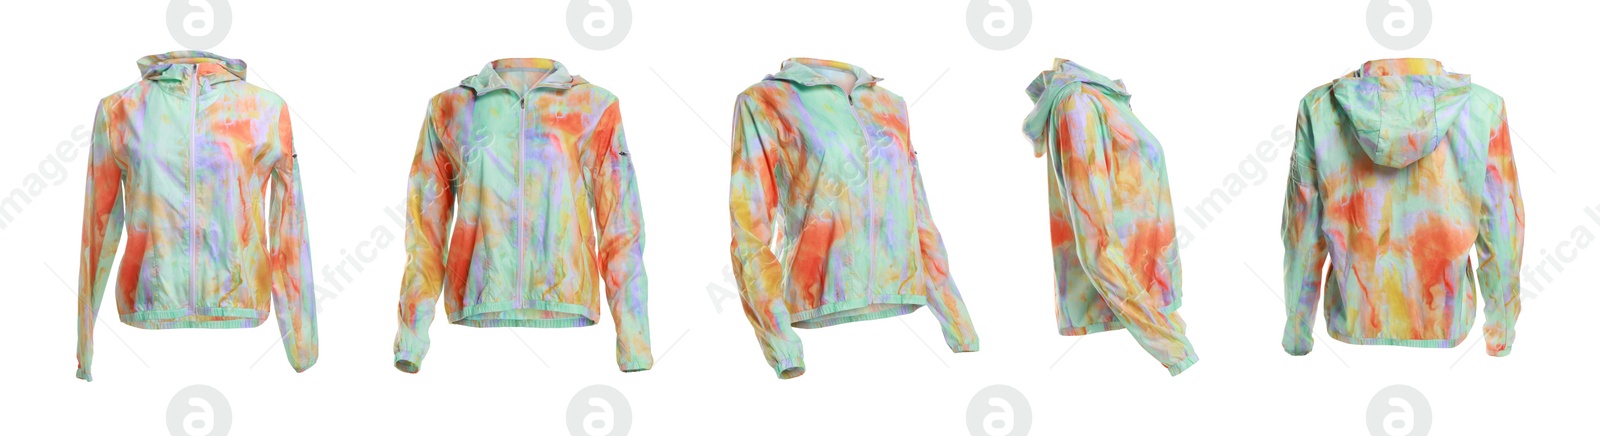 Image of Comfortable sportswear. Collage with bright sports windbreaker on white background, different sides